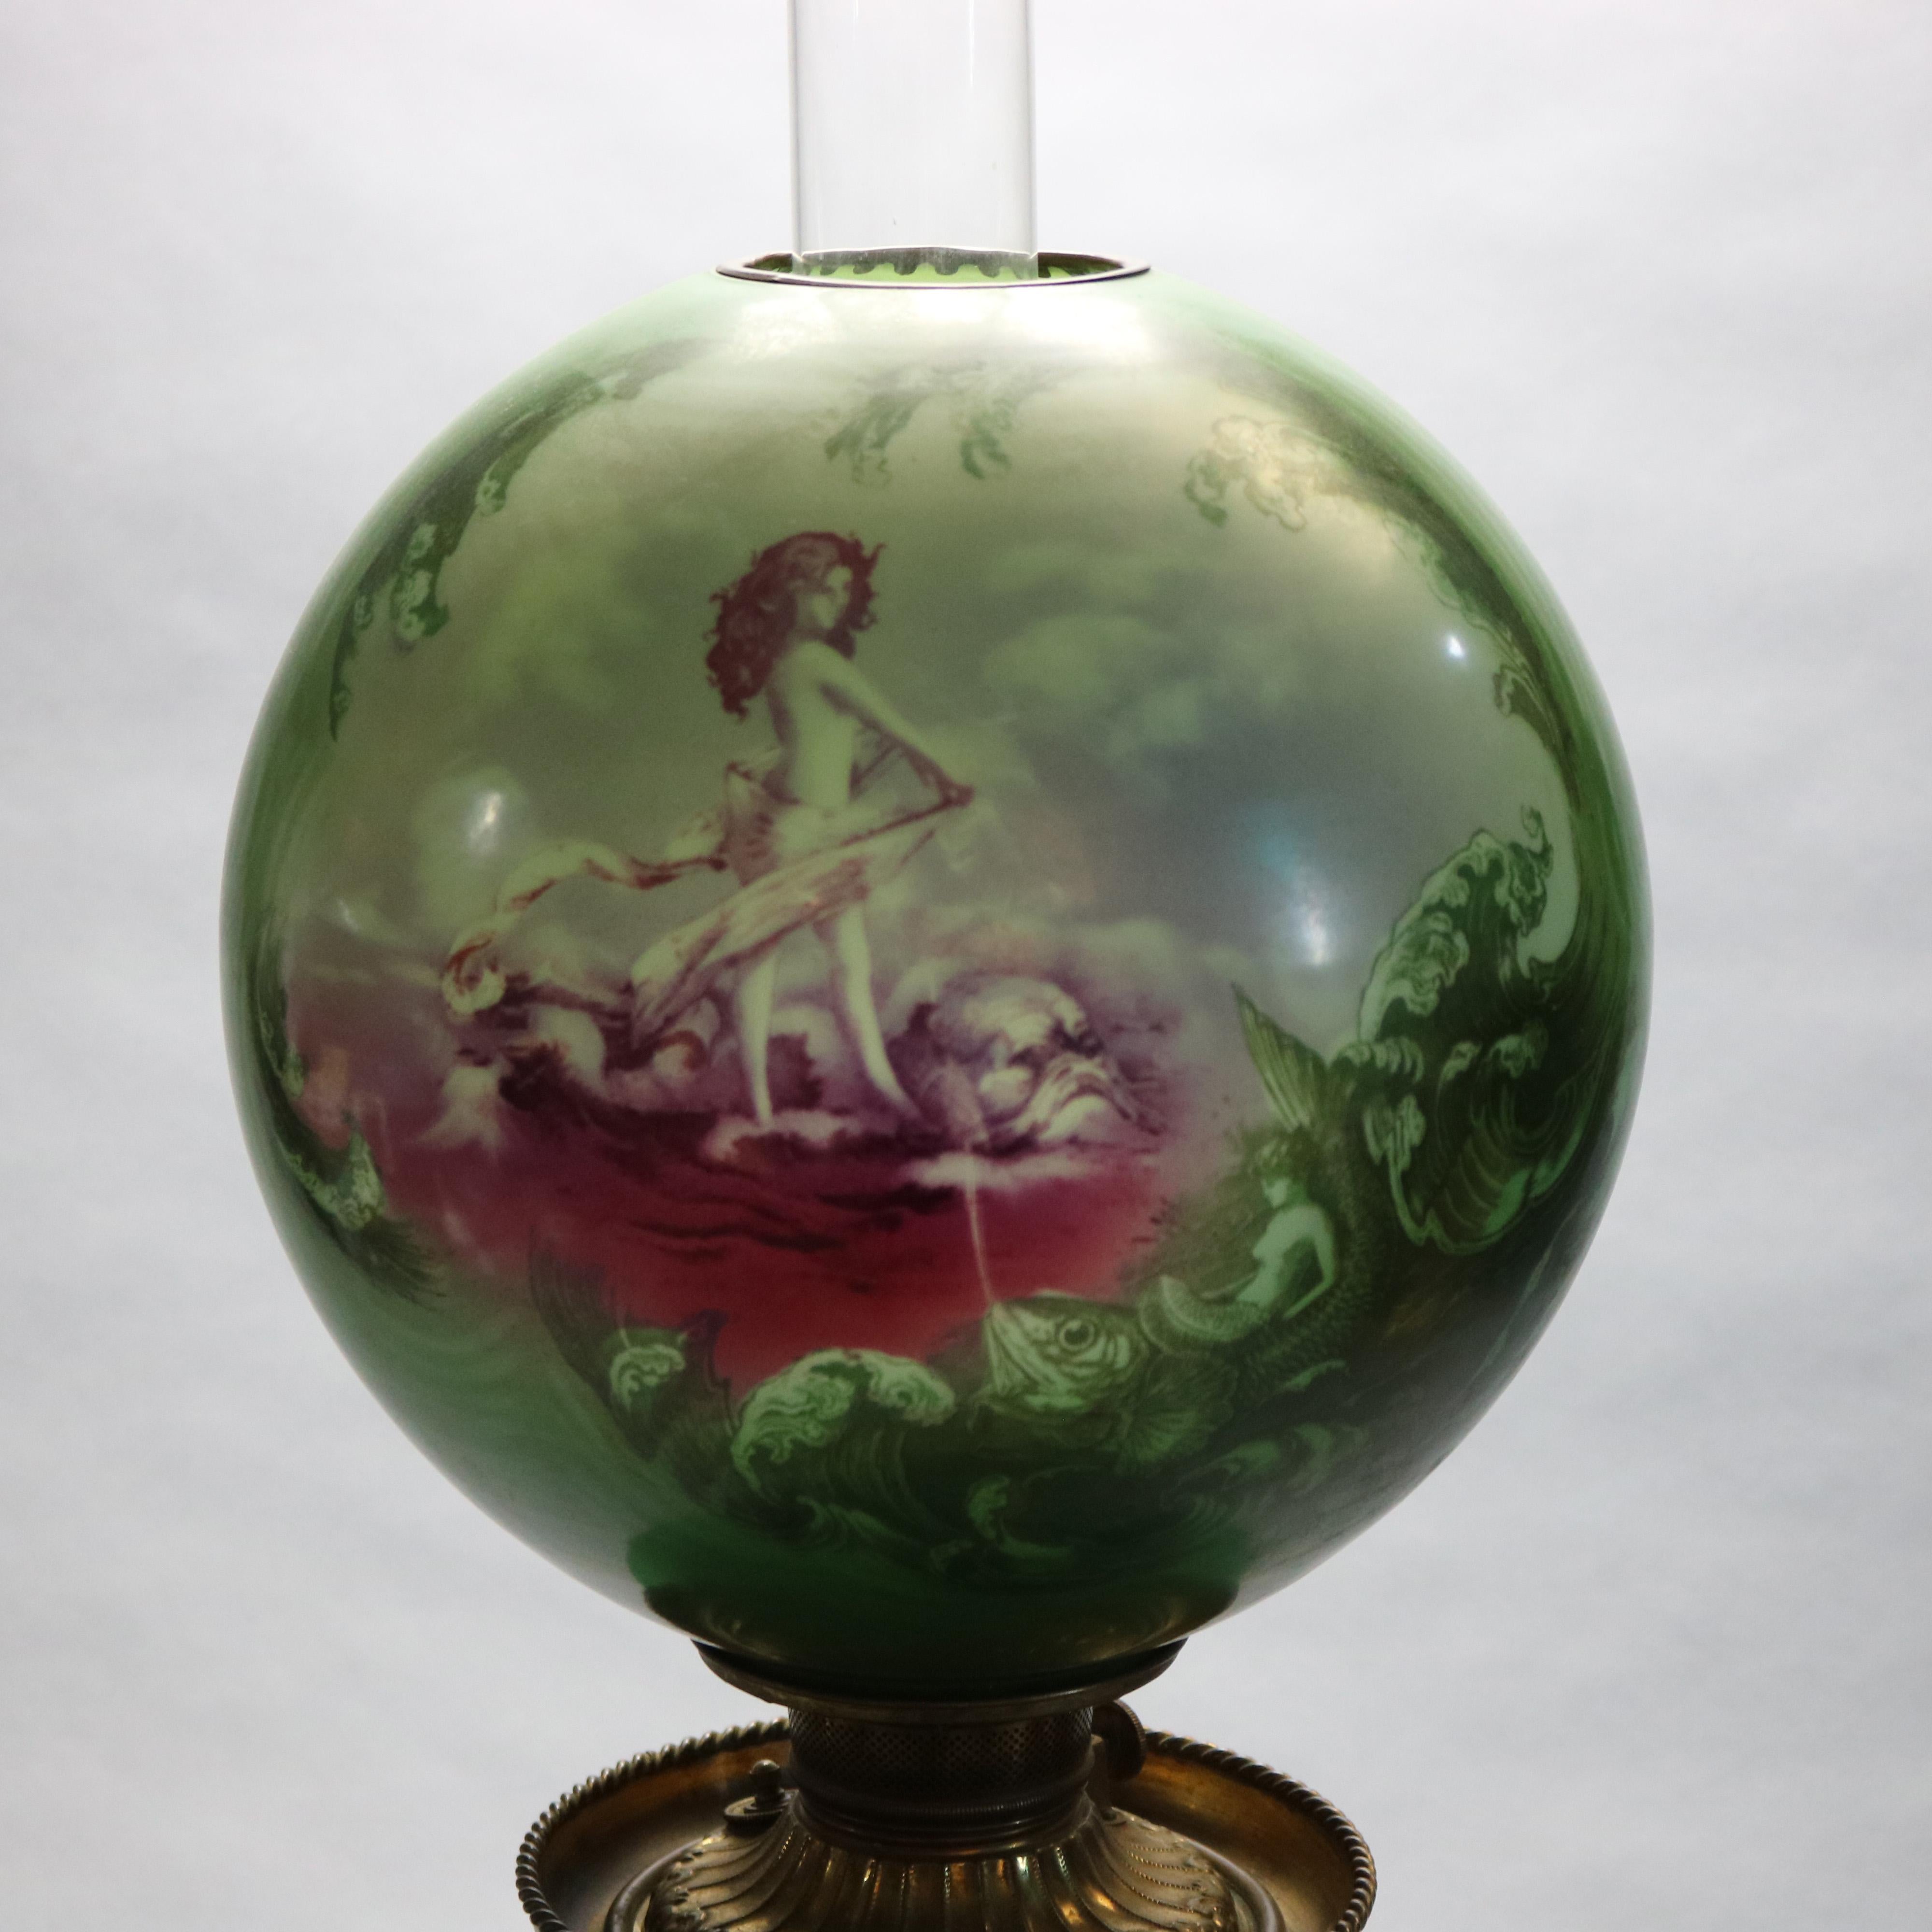 Victorian Antique Oversized Gone with the Wind Lamp, Hand-Painted Scenic with Mermaid